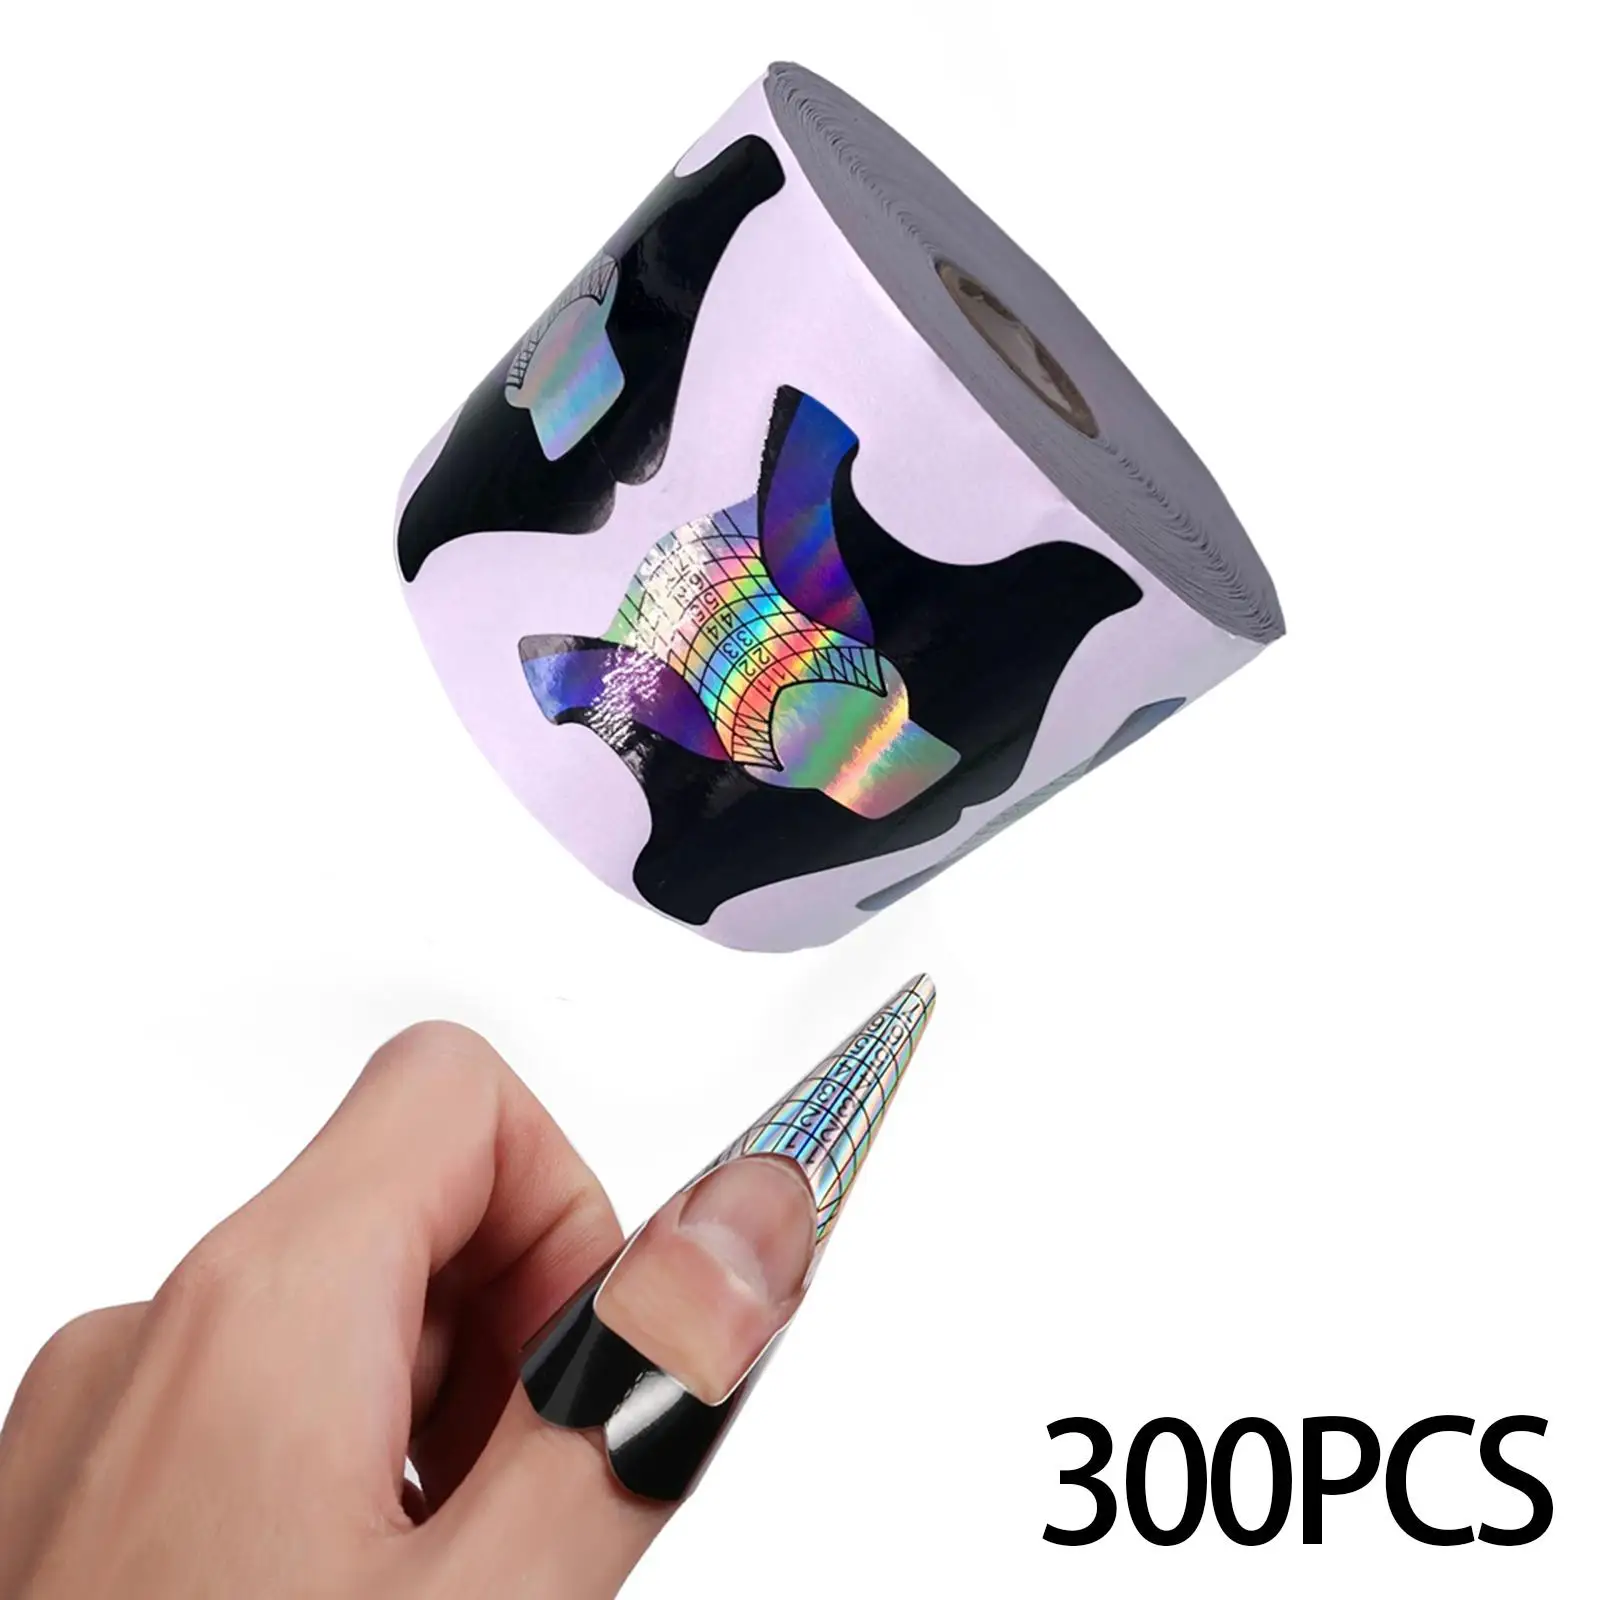 300 Pieces Nail Forms for Acrylic Nails Nail Extension Paper Forms for Salon DIY Artists Beginners Nail Art Decoration